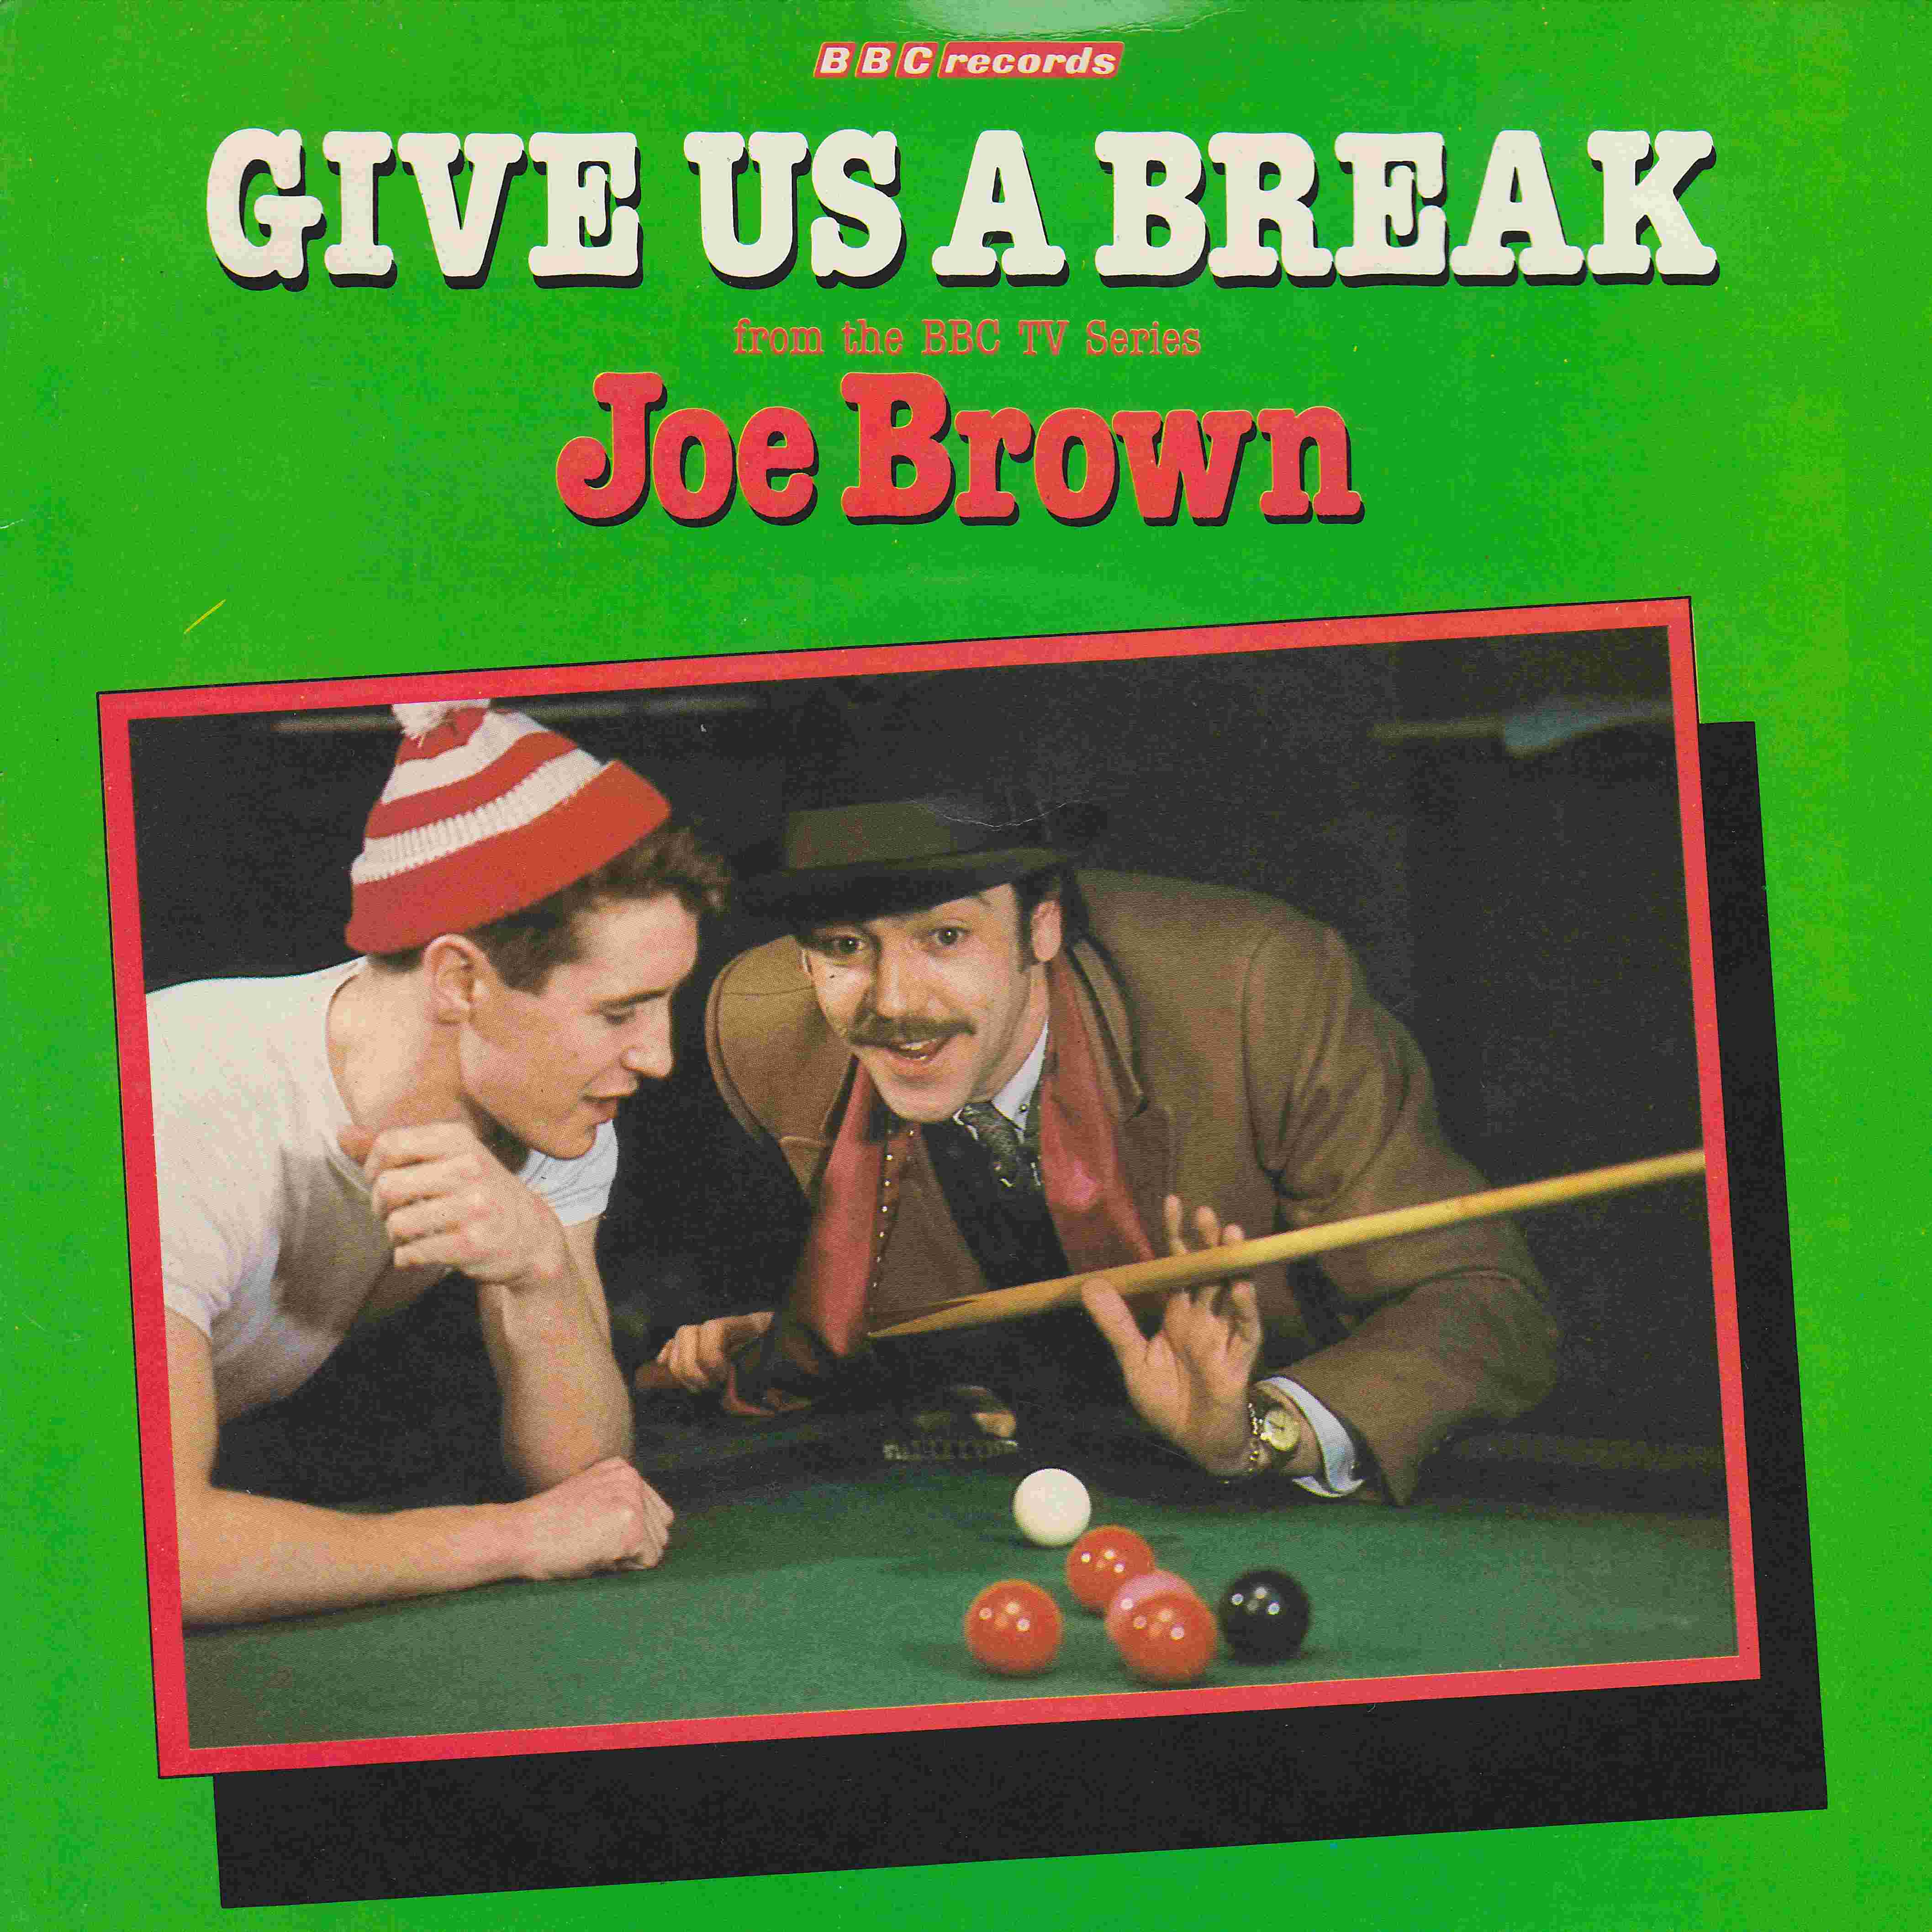 Picture of RESL 134 Give us a break by artist Joe Brown / Harry South / Leventon from the BBC records and Tapes library